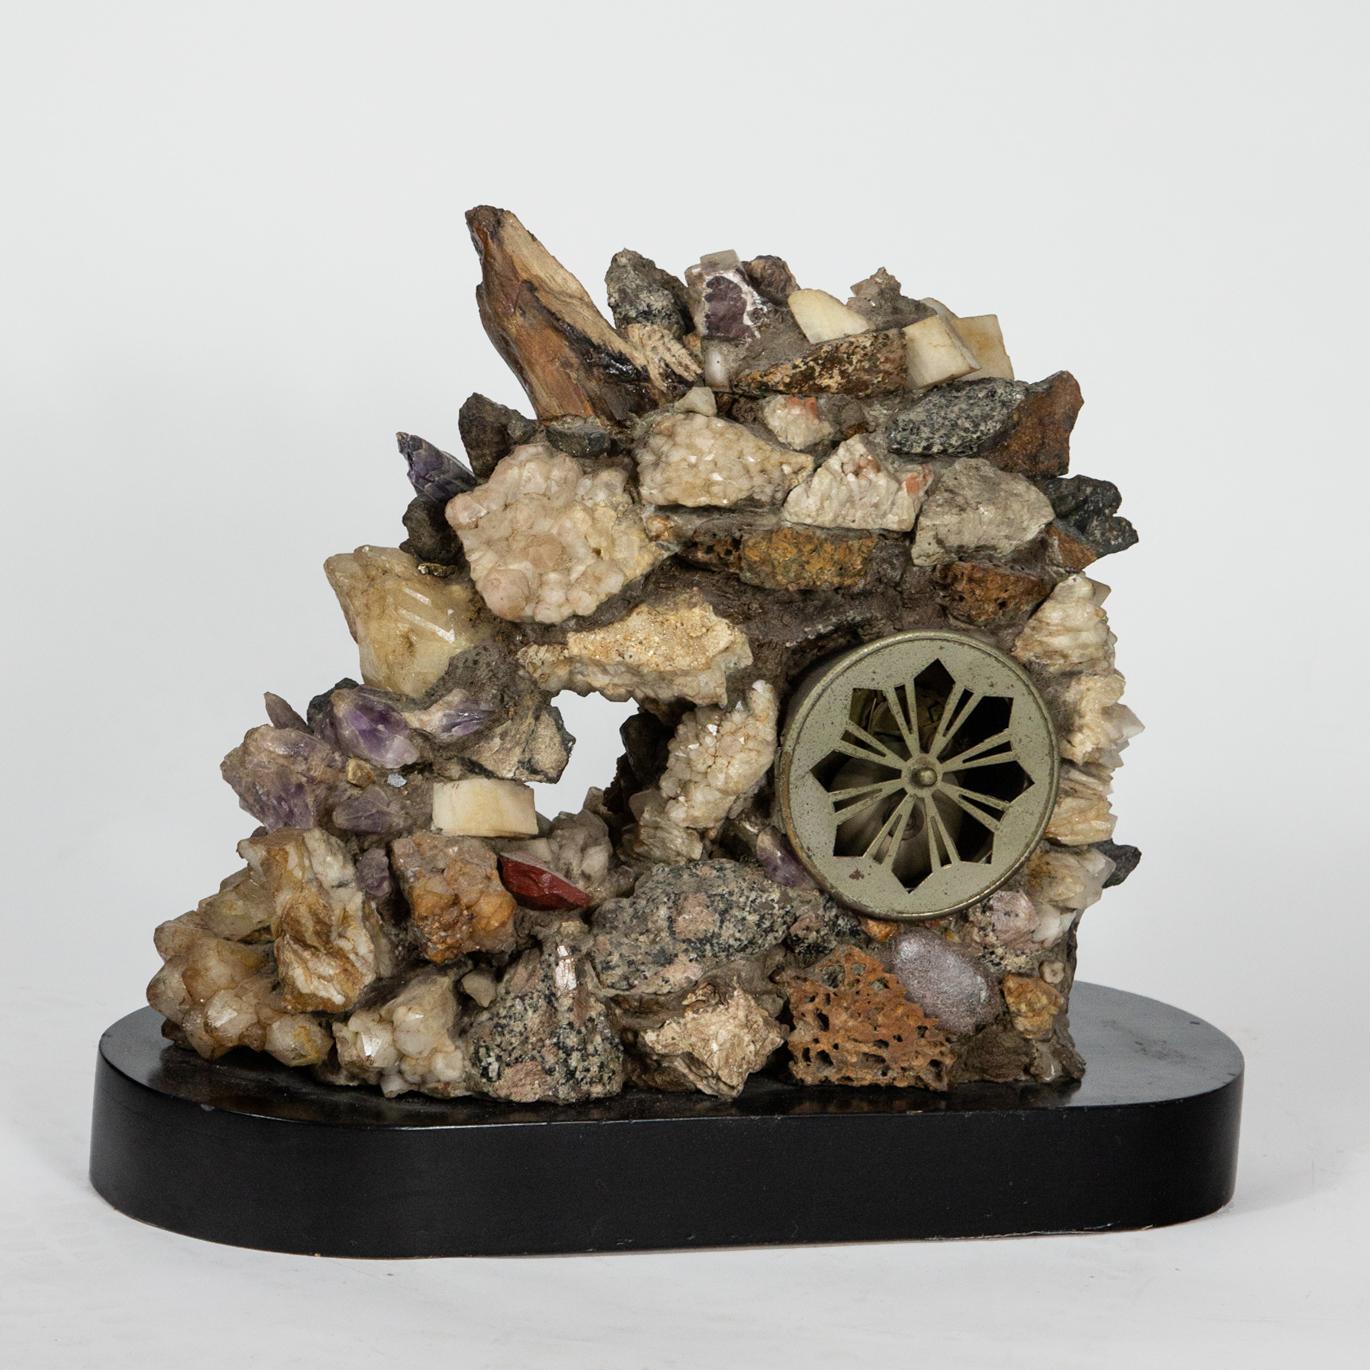 Mixed mineral clock with key. Roman numeral clock with key surrounded by minerals on black base. Measure: 15